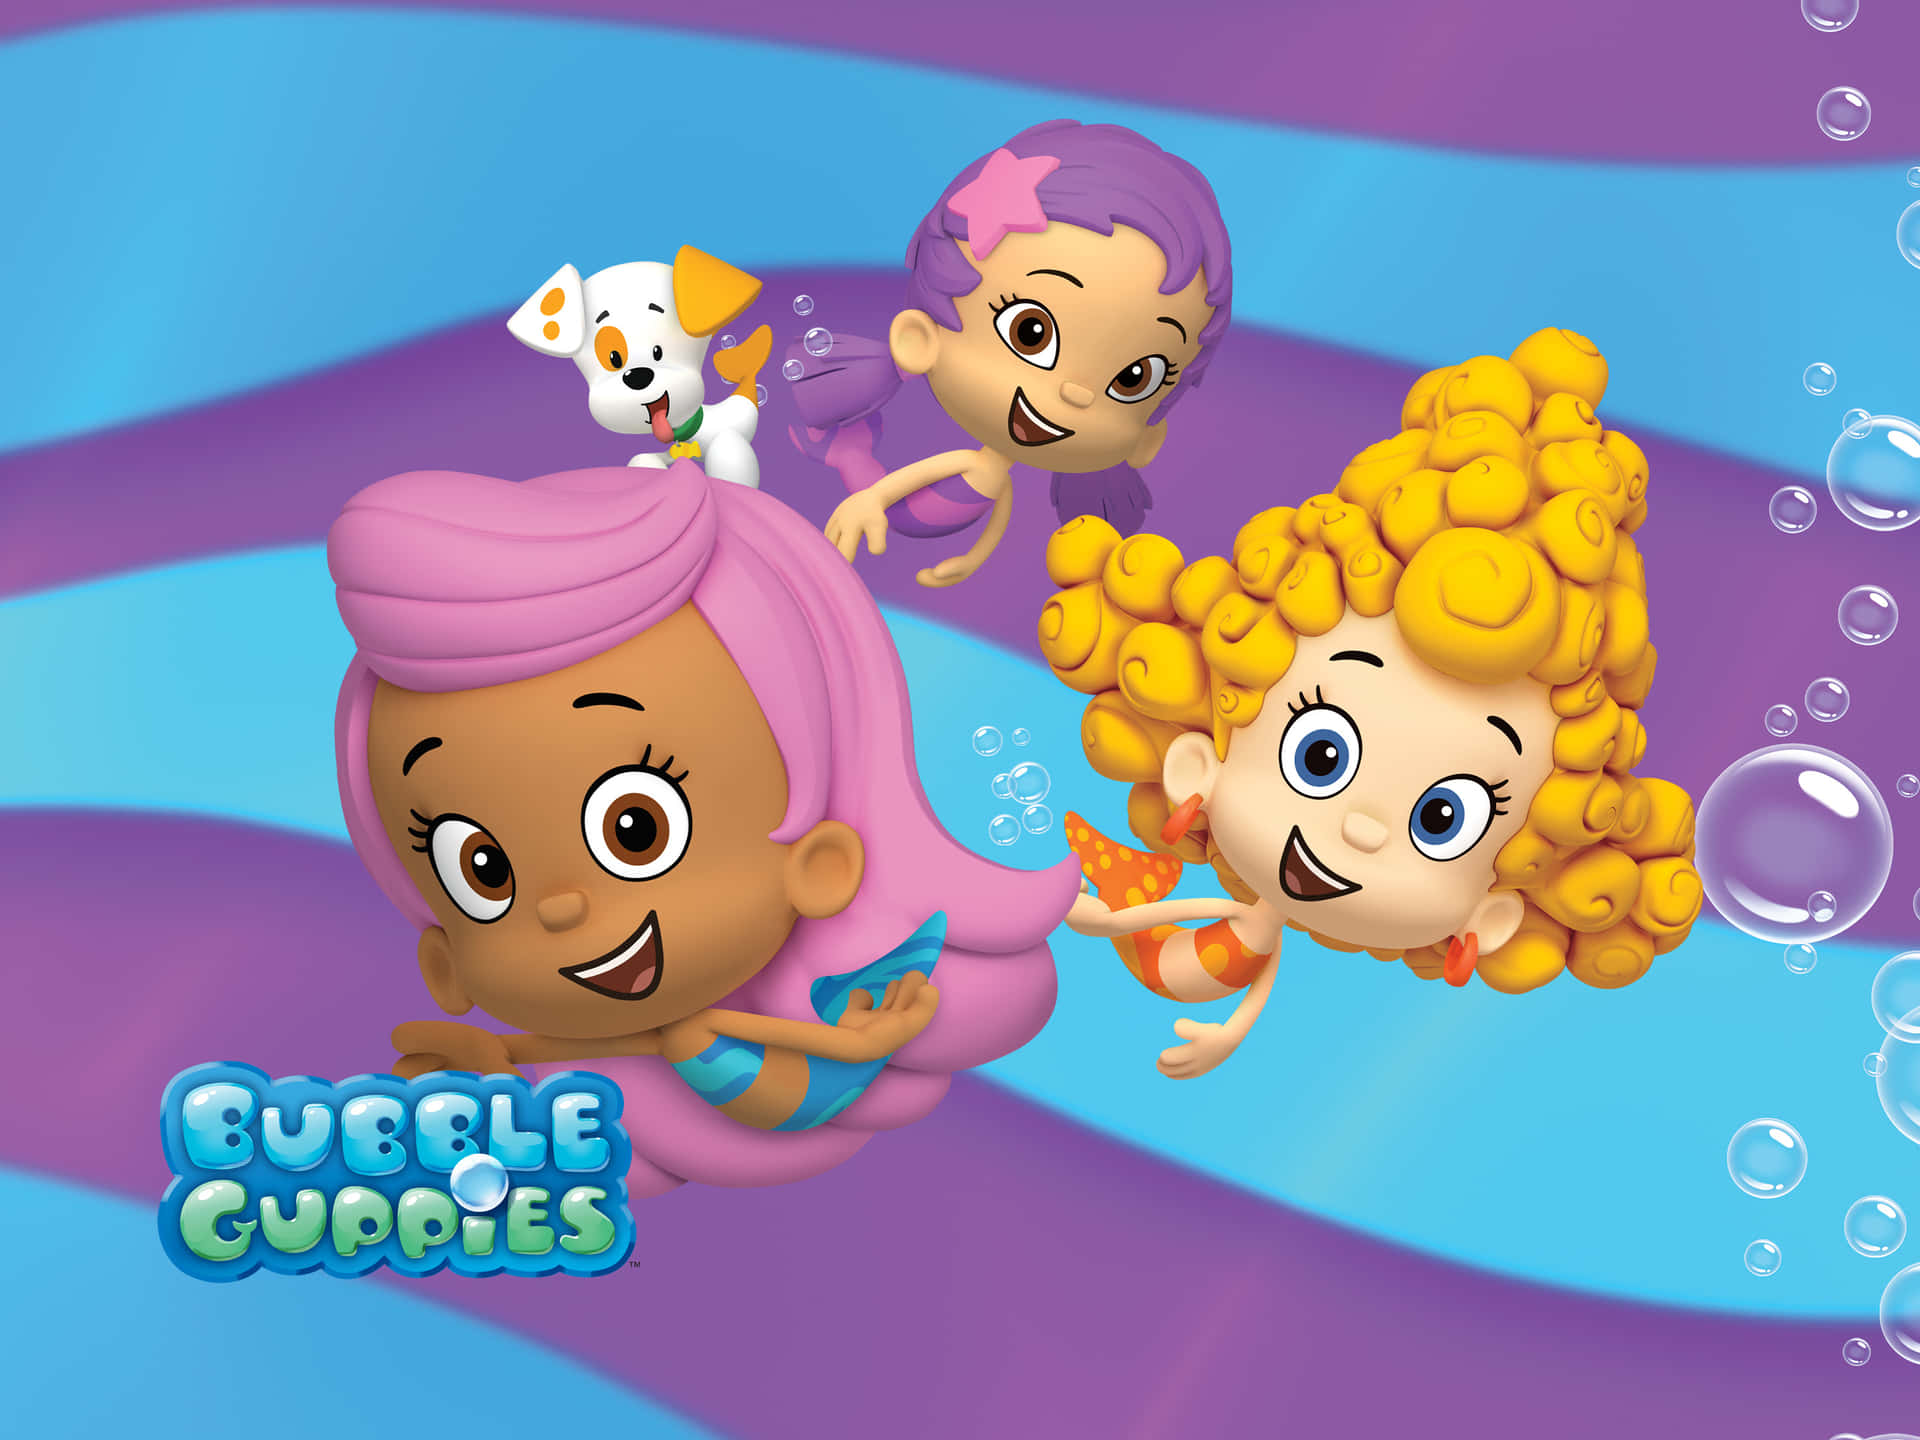 Take a magical Dive-o with the Bubble Guppies!